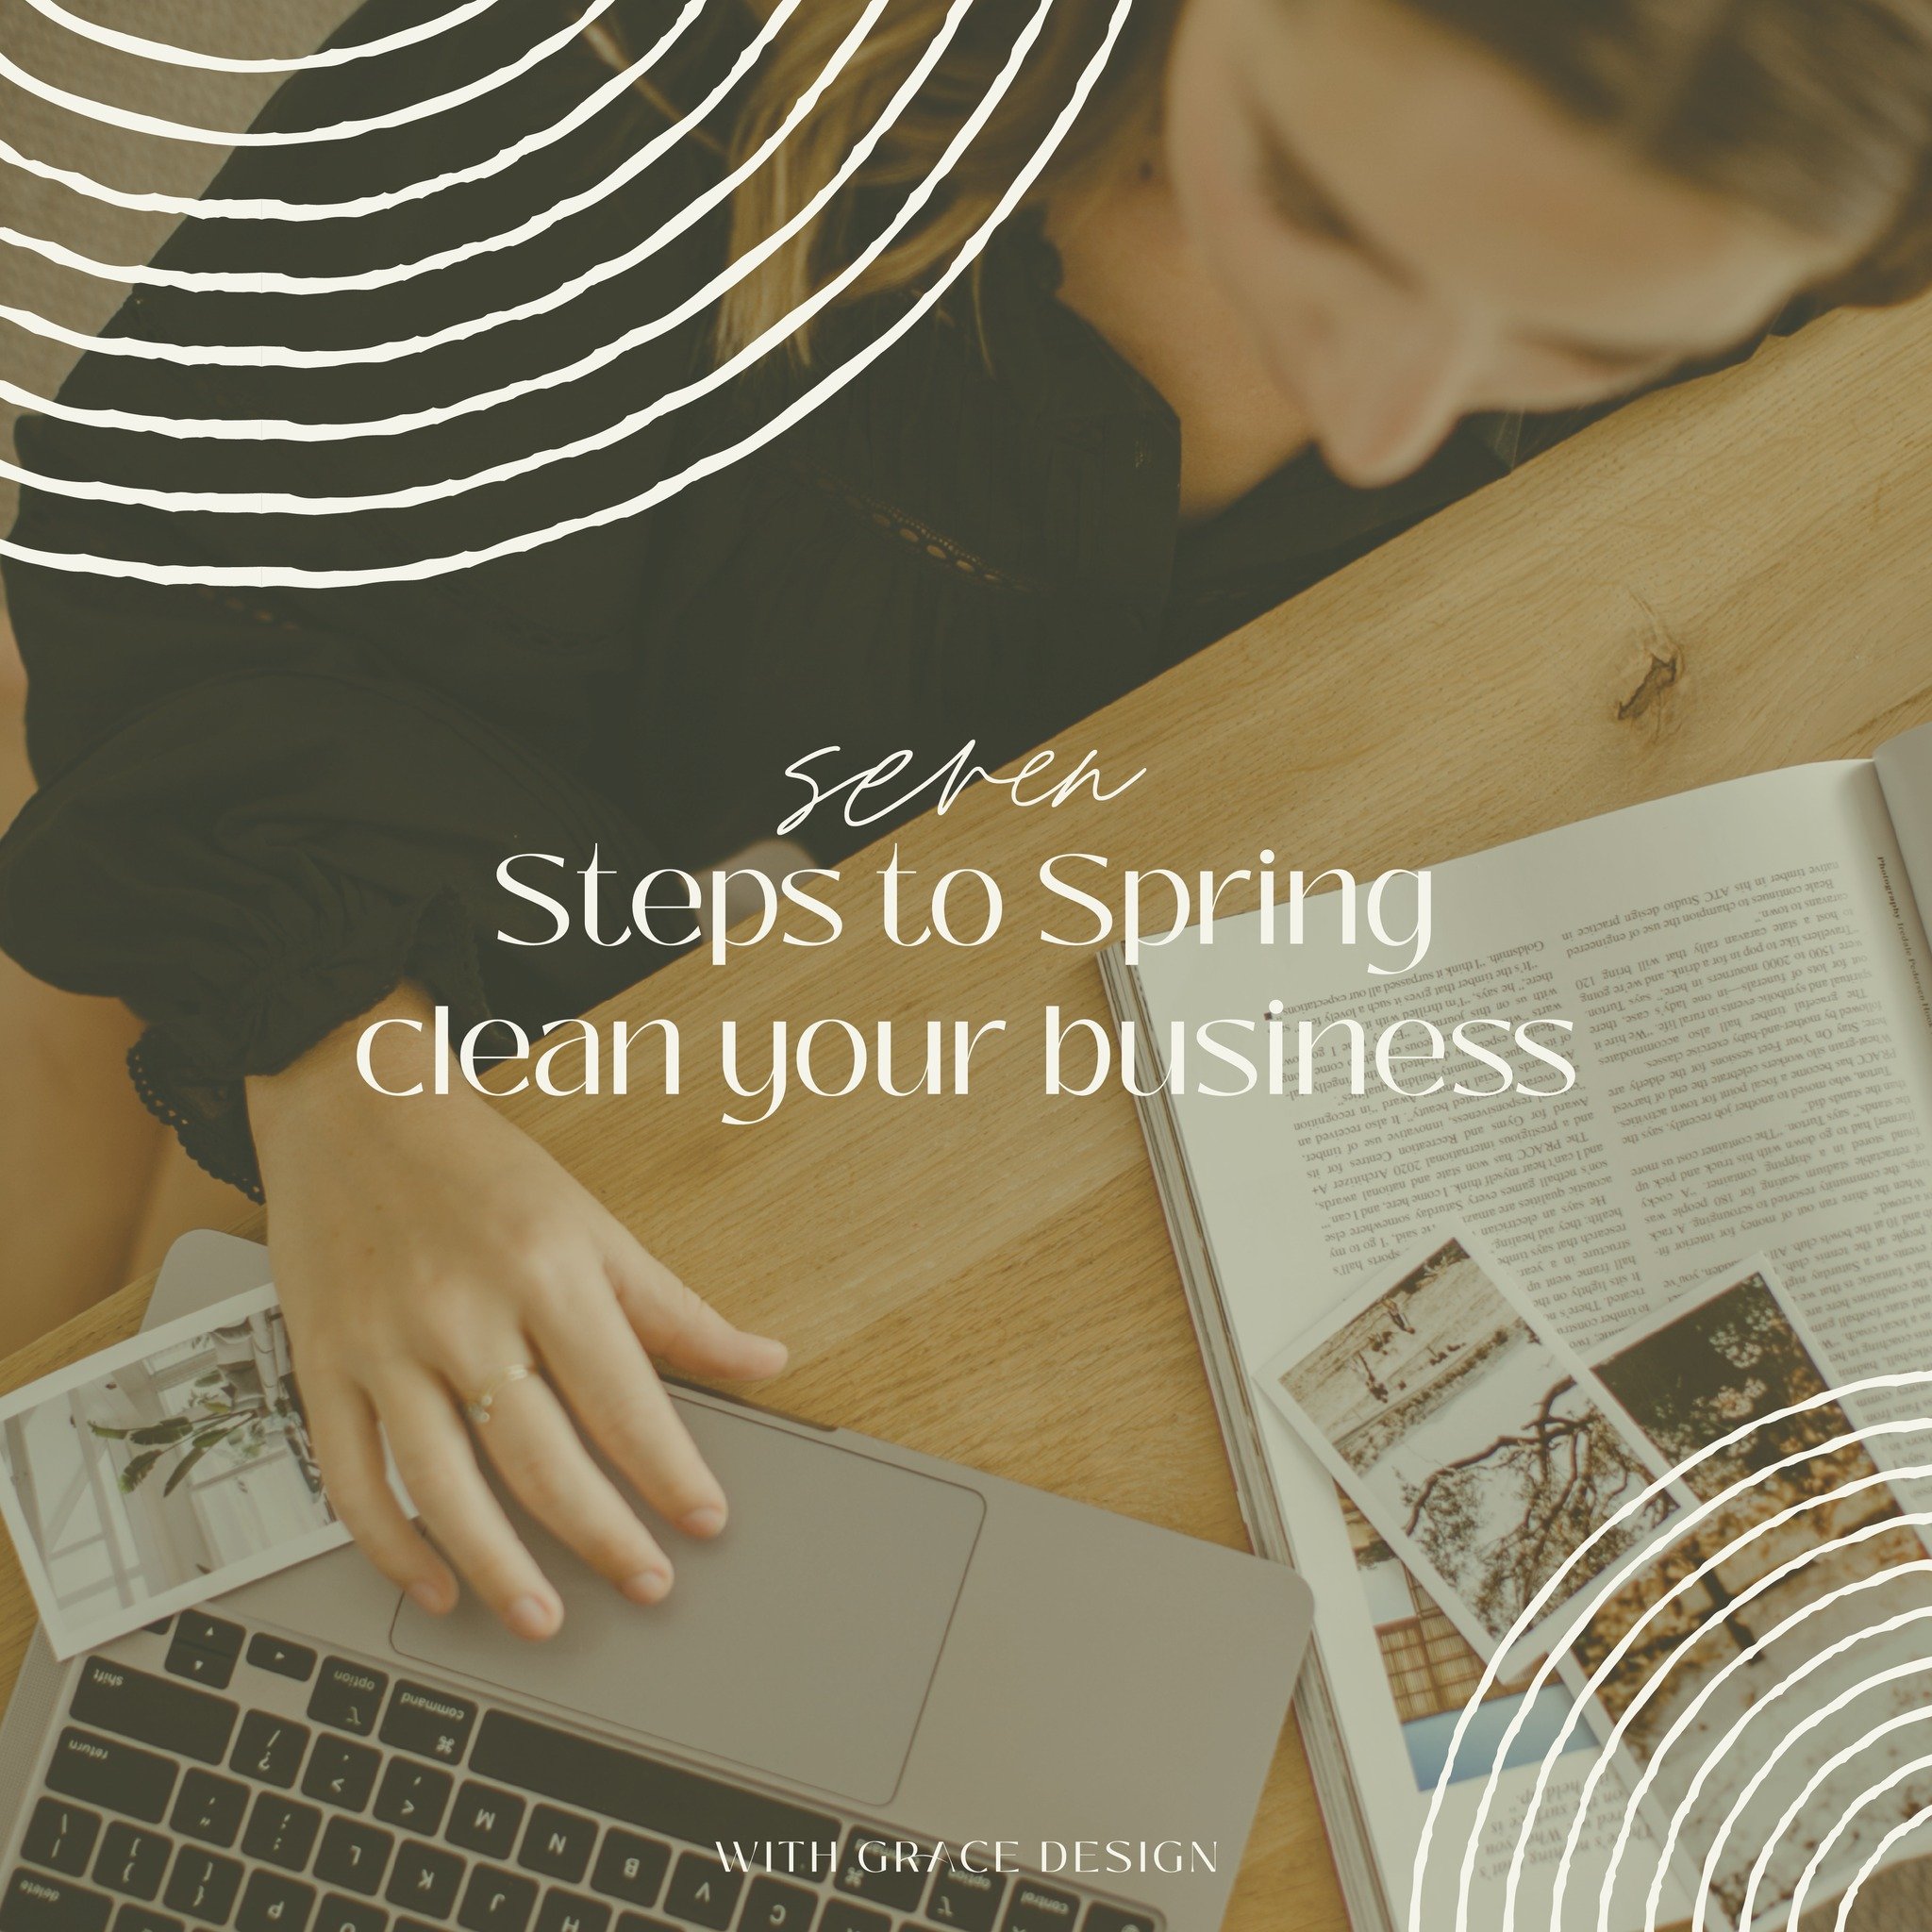 Here are 7 Steps to Spring clean your business &amp; give it the refresh it deserves! 🌻

Want more tips and tricks? sign up for my VIP email list via the website link in my bio!

#withgracedesign